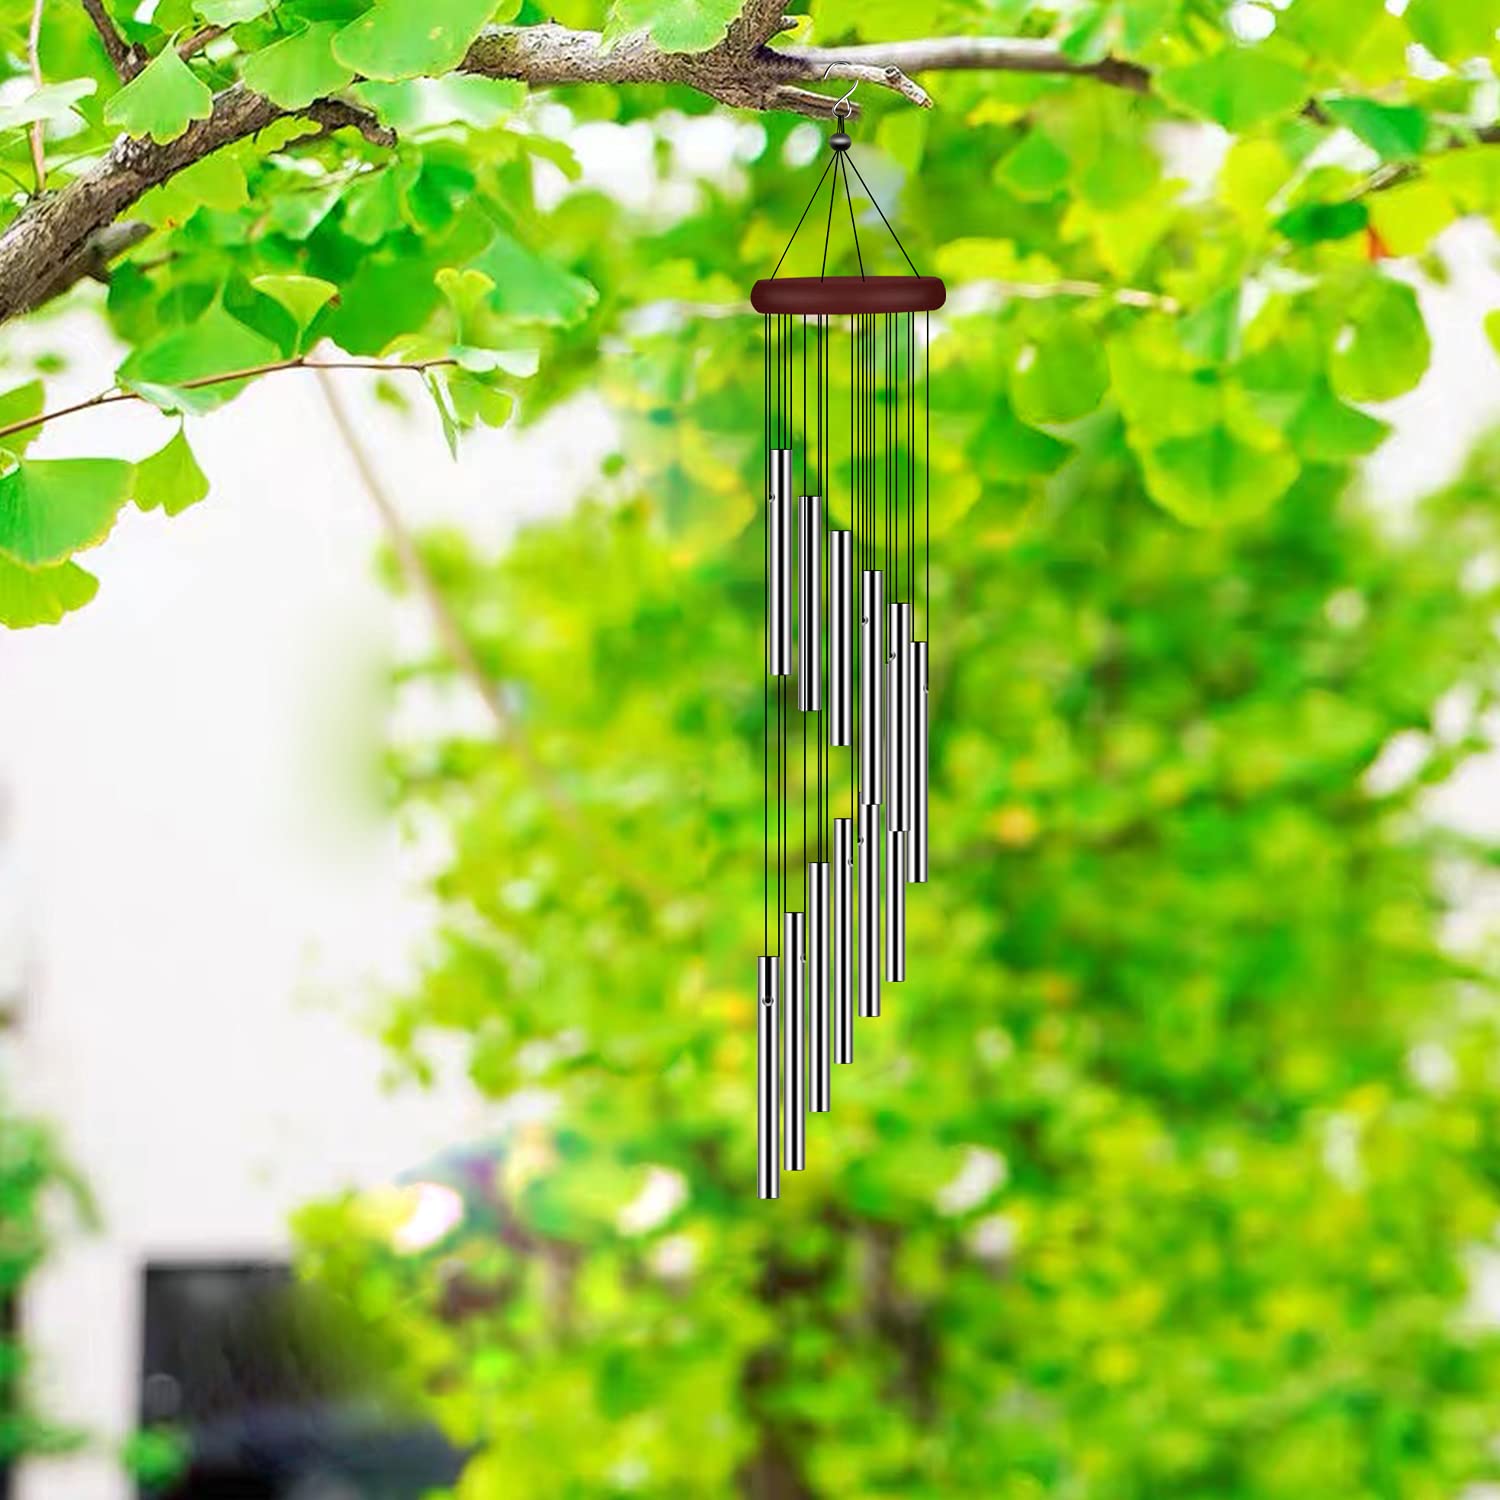 Wind Chimes for Outside, Sympathy Wind Chimes Outdoor Clearance with 12 Aluminum Alloy Tubes and Hook, Memorial Wind Chimes Gift Decoration for Home, Patio, Garden, Outdoor